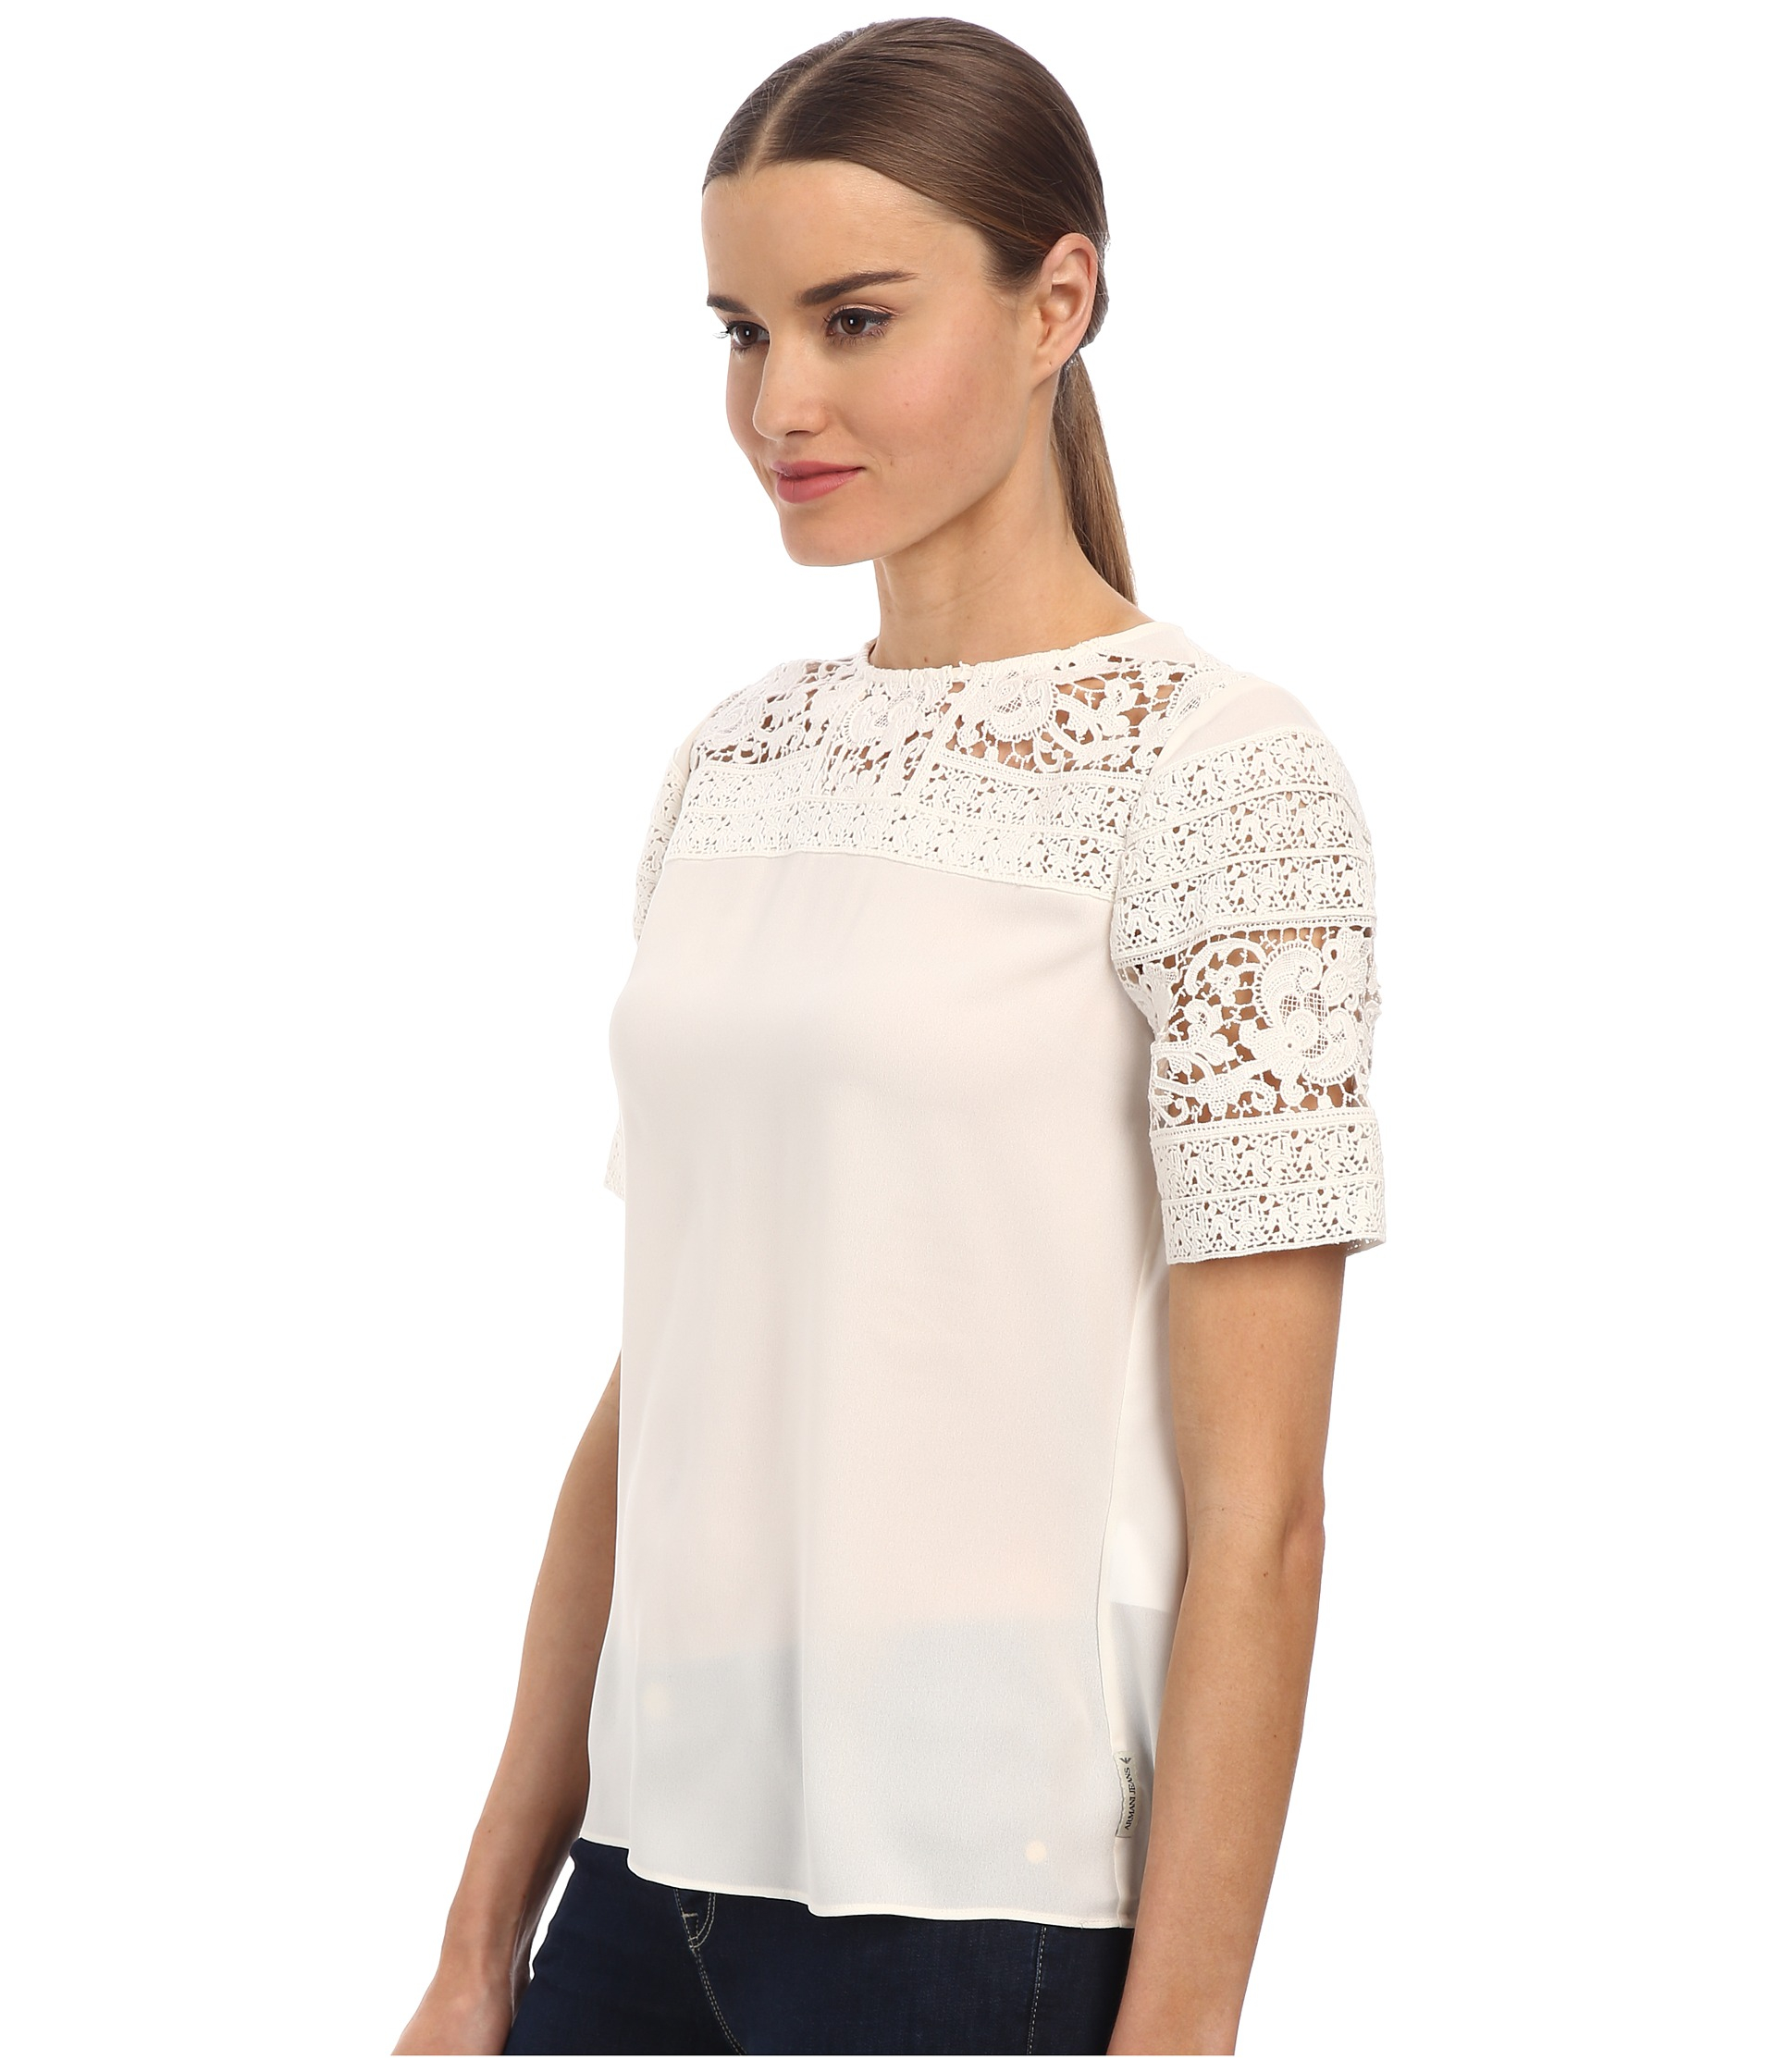 Lyst - Armani jeans Lace Illusion Blouse in White